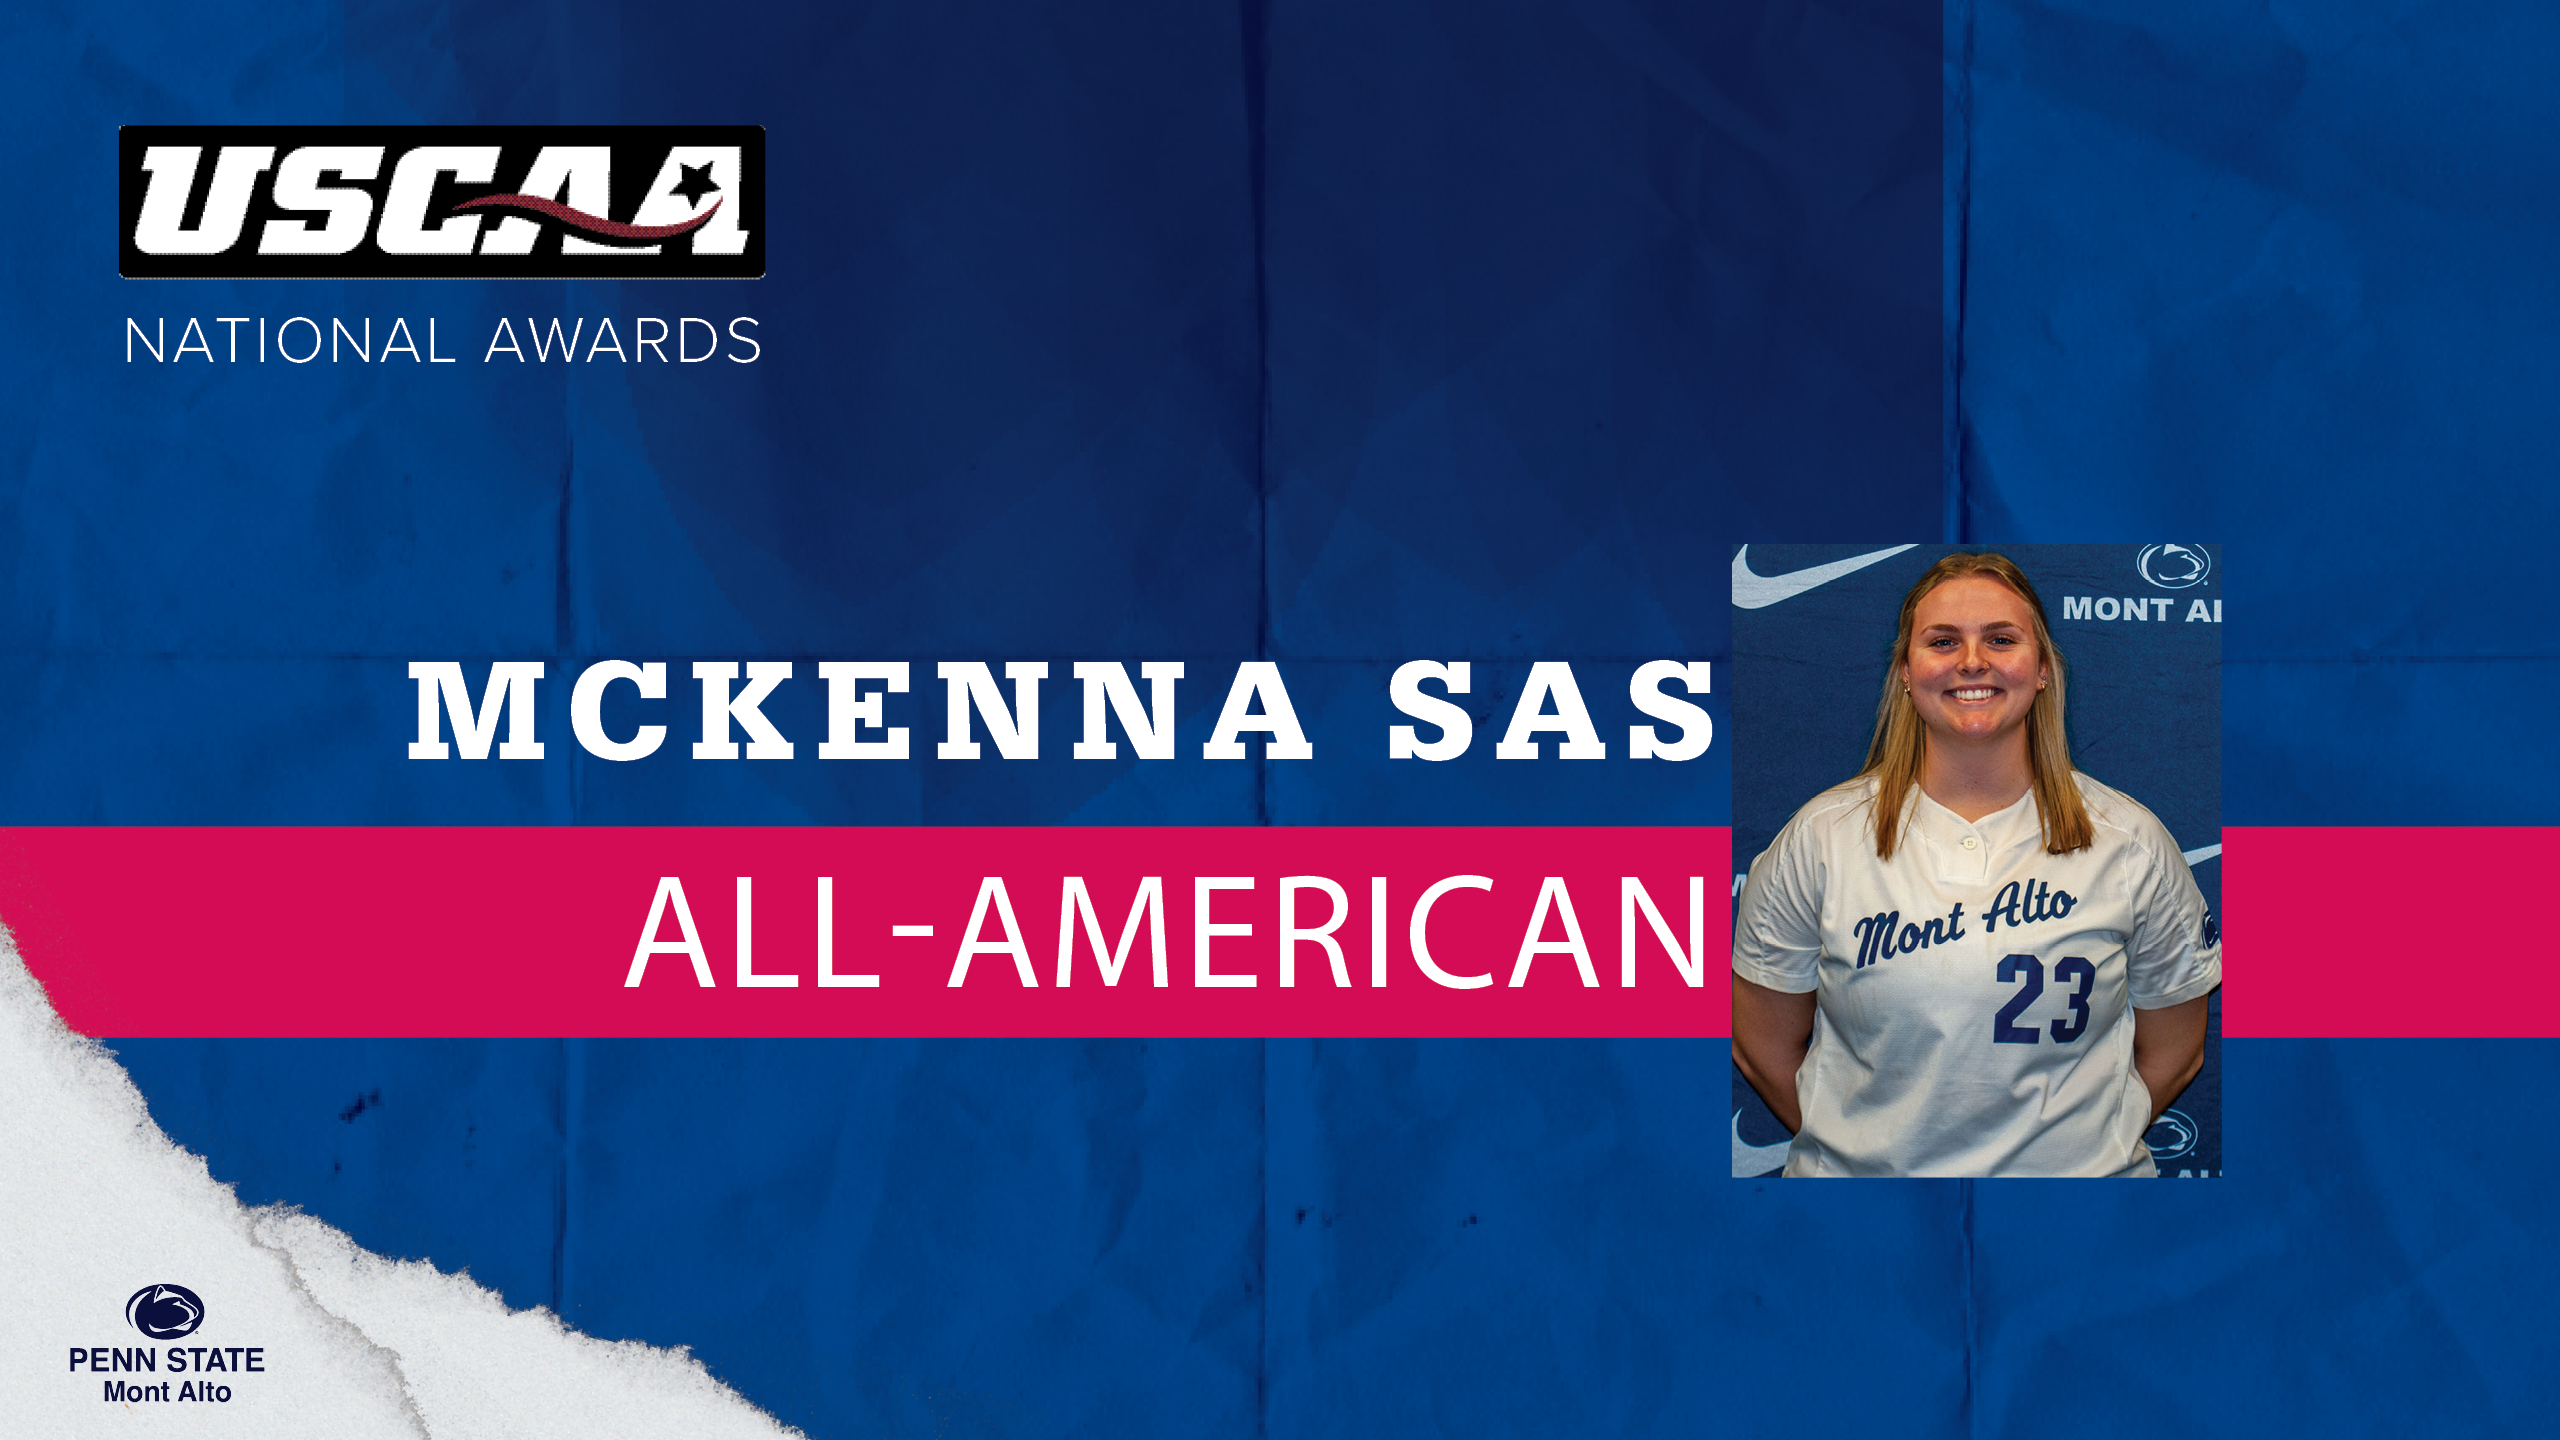 Seven softball players honored by USCAA